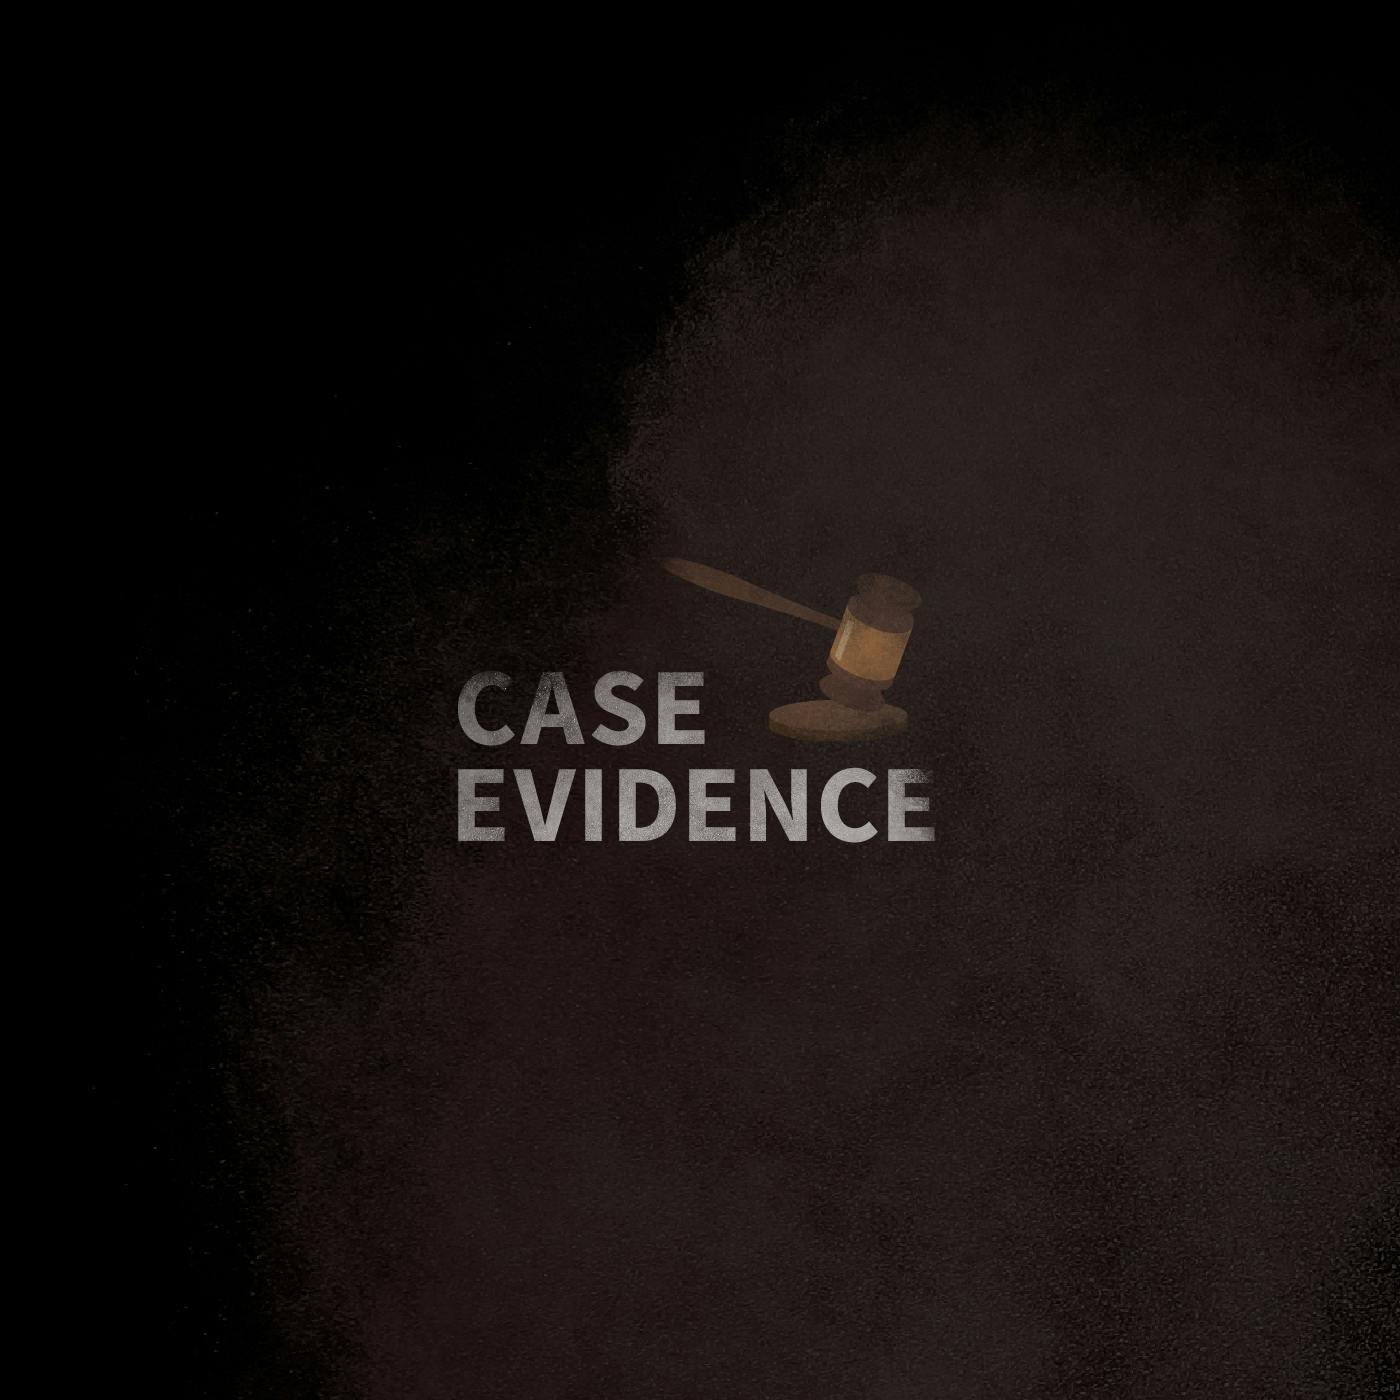 Case Evidence 06.26.17 by Tenderfoot TV